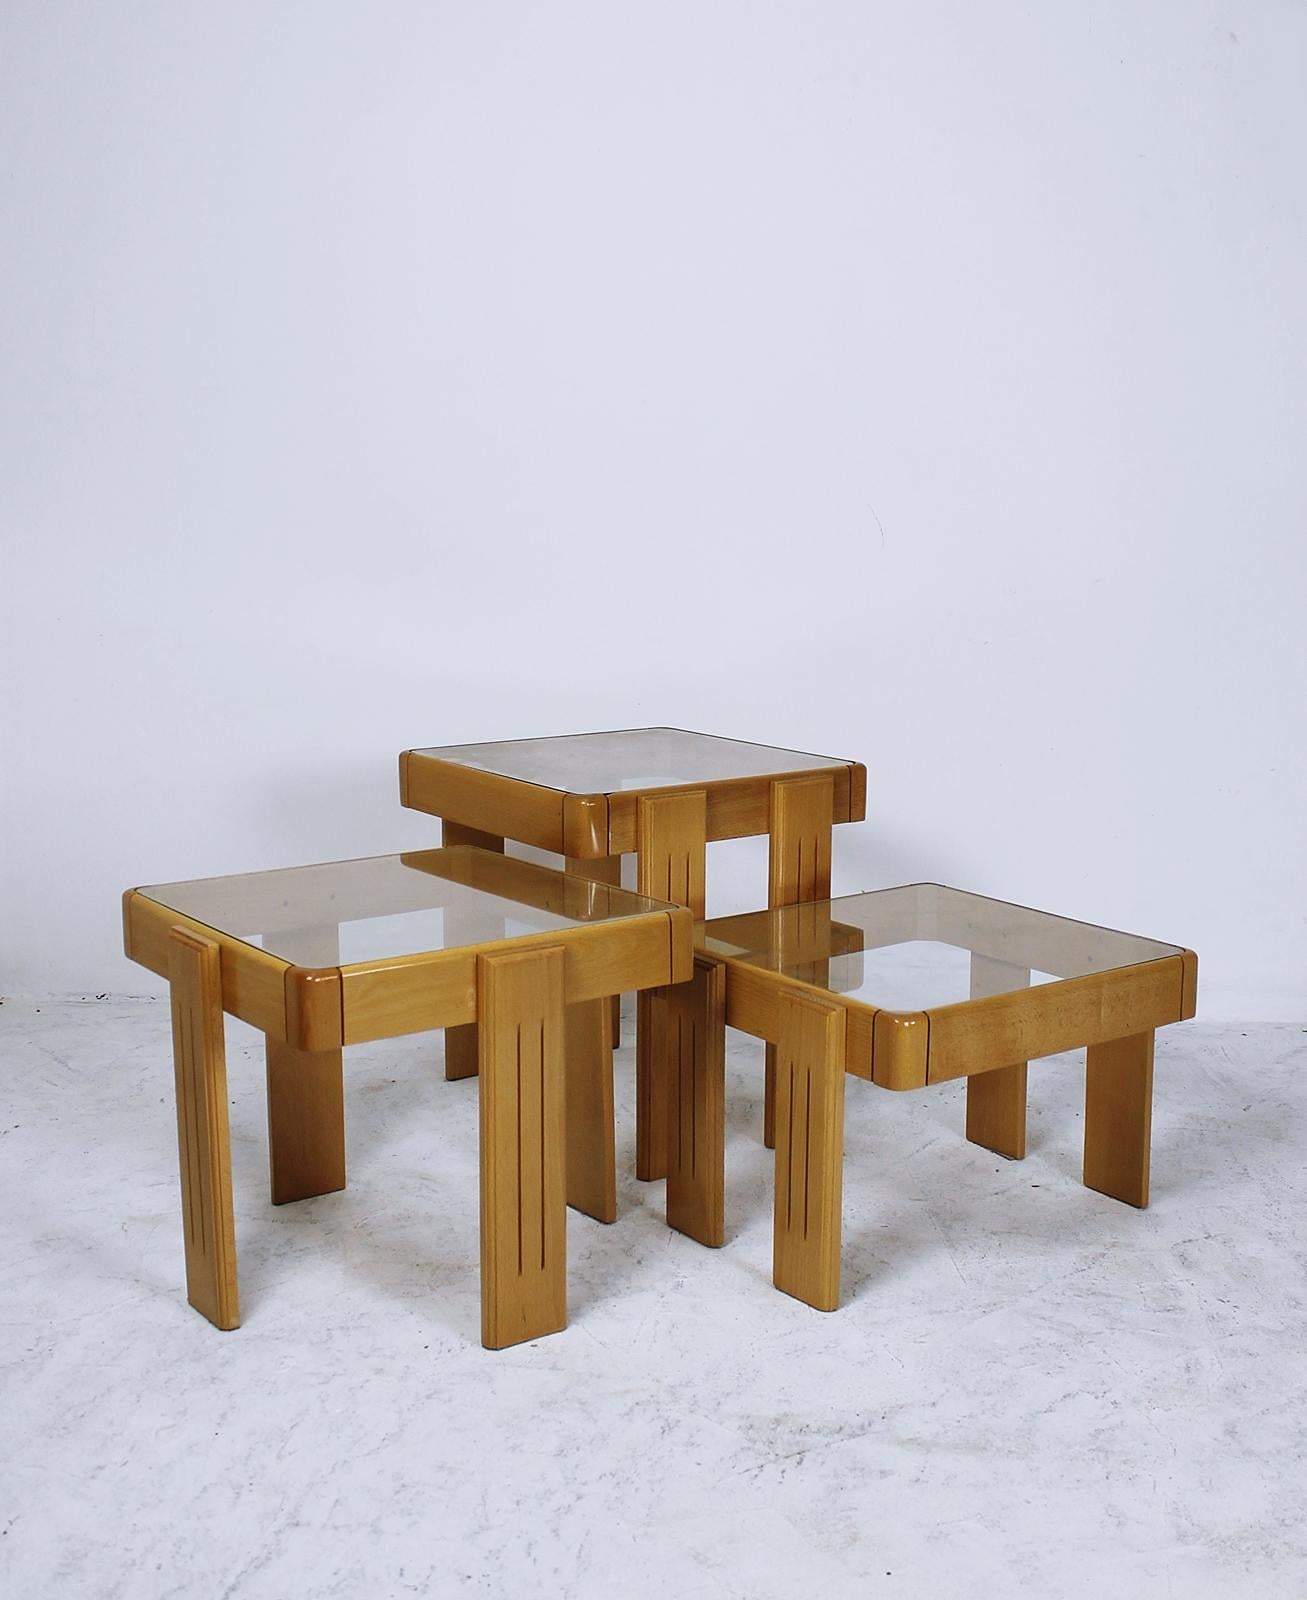 Modern set of 3 nesting, stacking, side or end tables
Material: wood (maple), glass
Age: vintage, midcentury
Origin: Yugoslavia
Condition: good, age related wear
Dimensions: 51 x 48 x 48 cm 42 x 48 x 48cm 31 x 48 x 48cm.